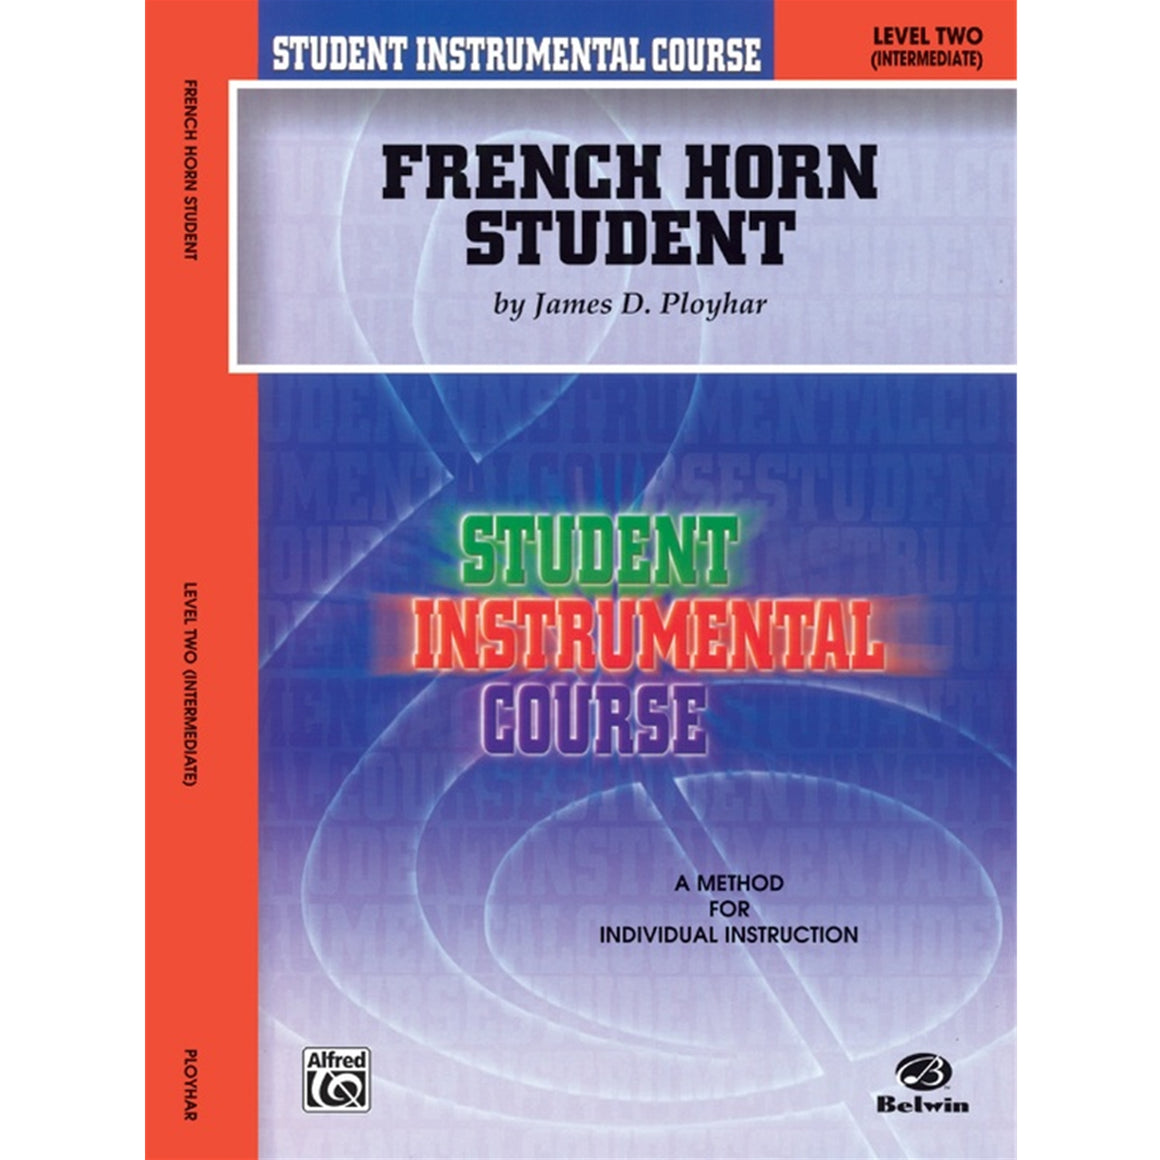 ALFRED BIC00251A Student Instrumental Course: French Horn Student, Level II [French Horn]